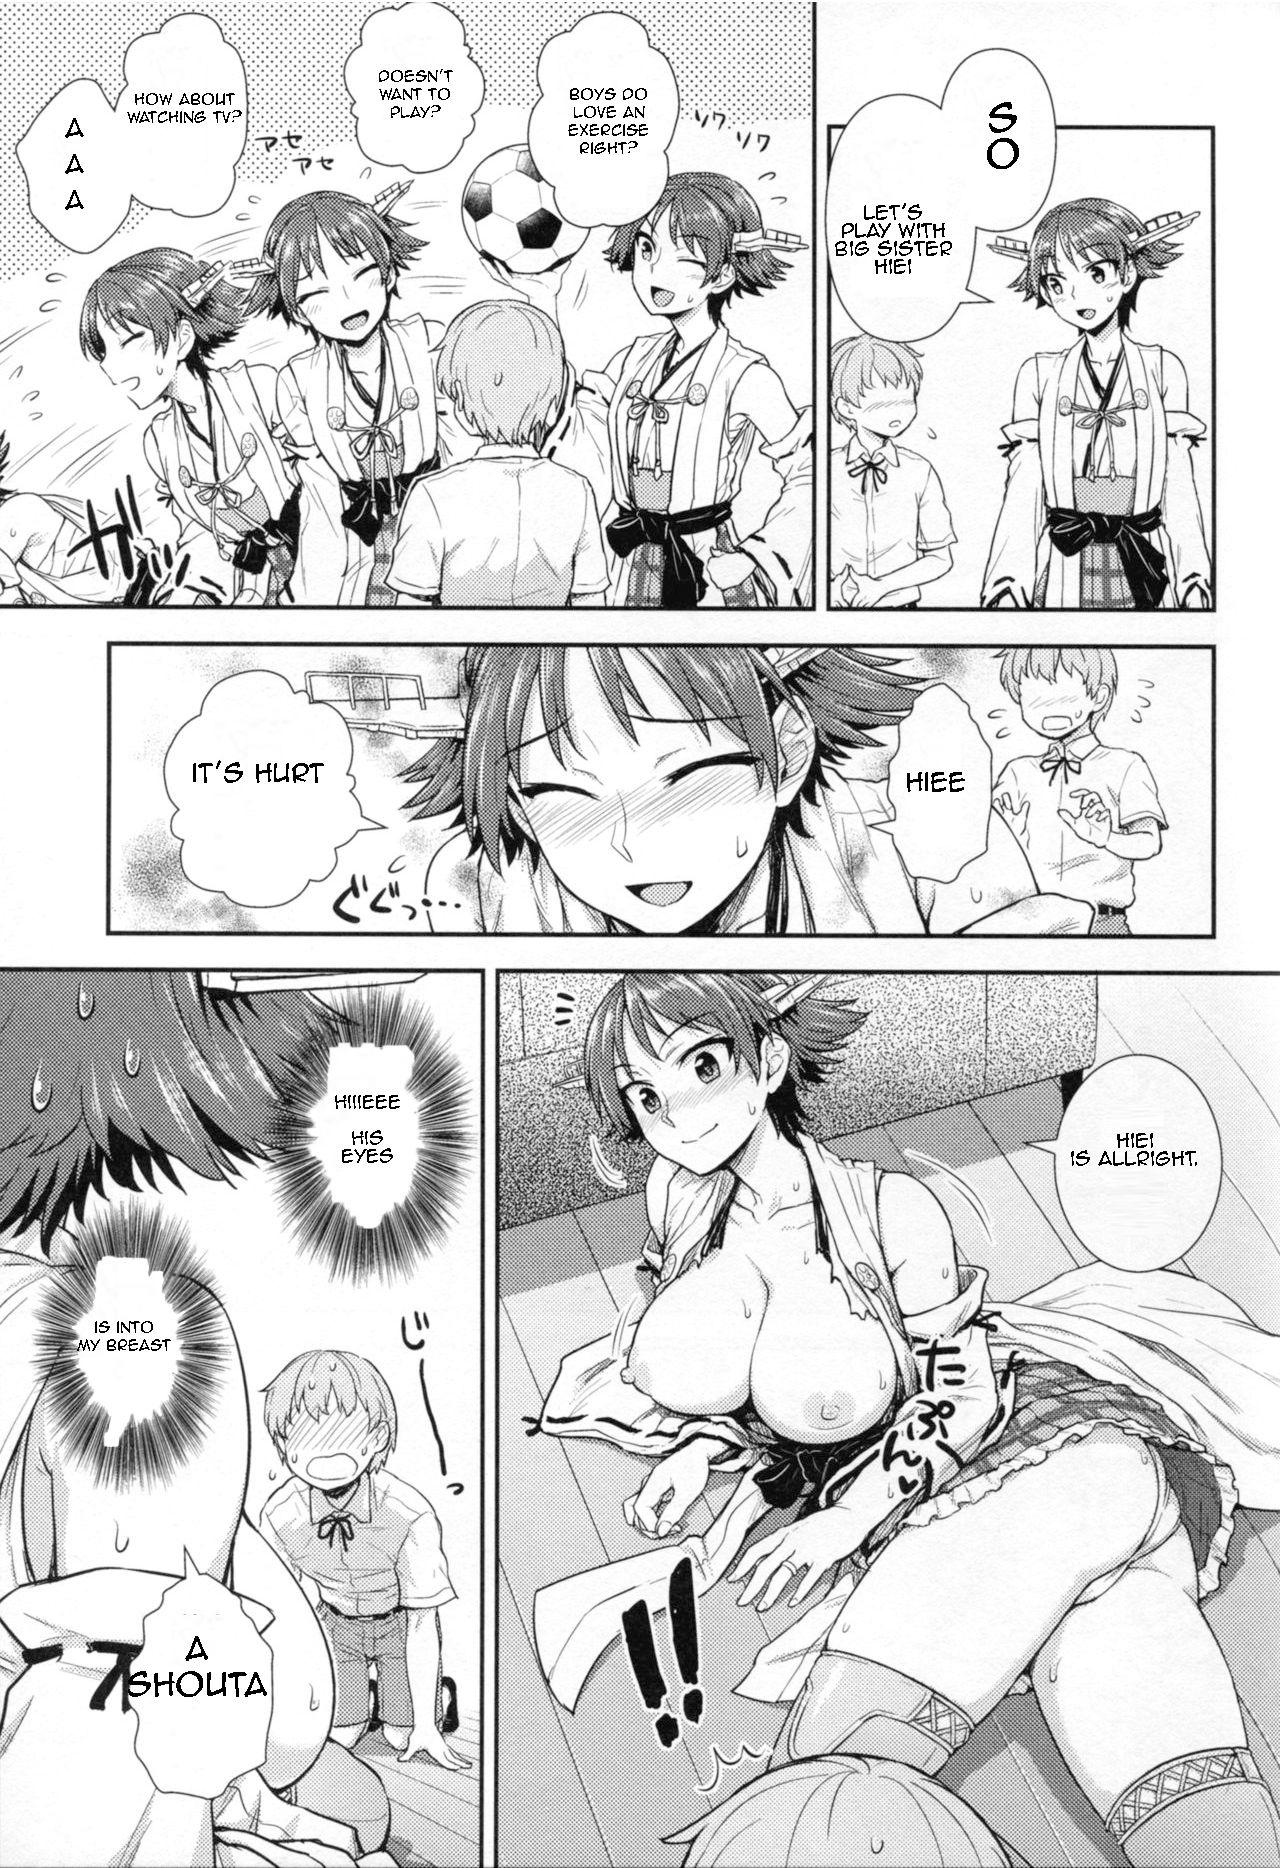 Leave it to HIei! 3